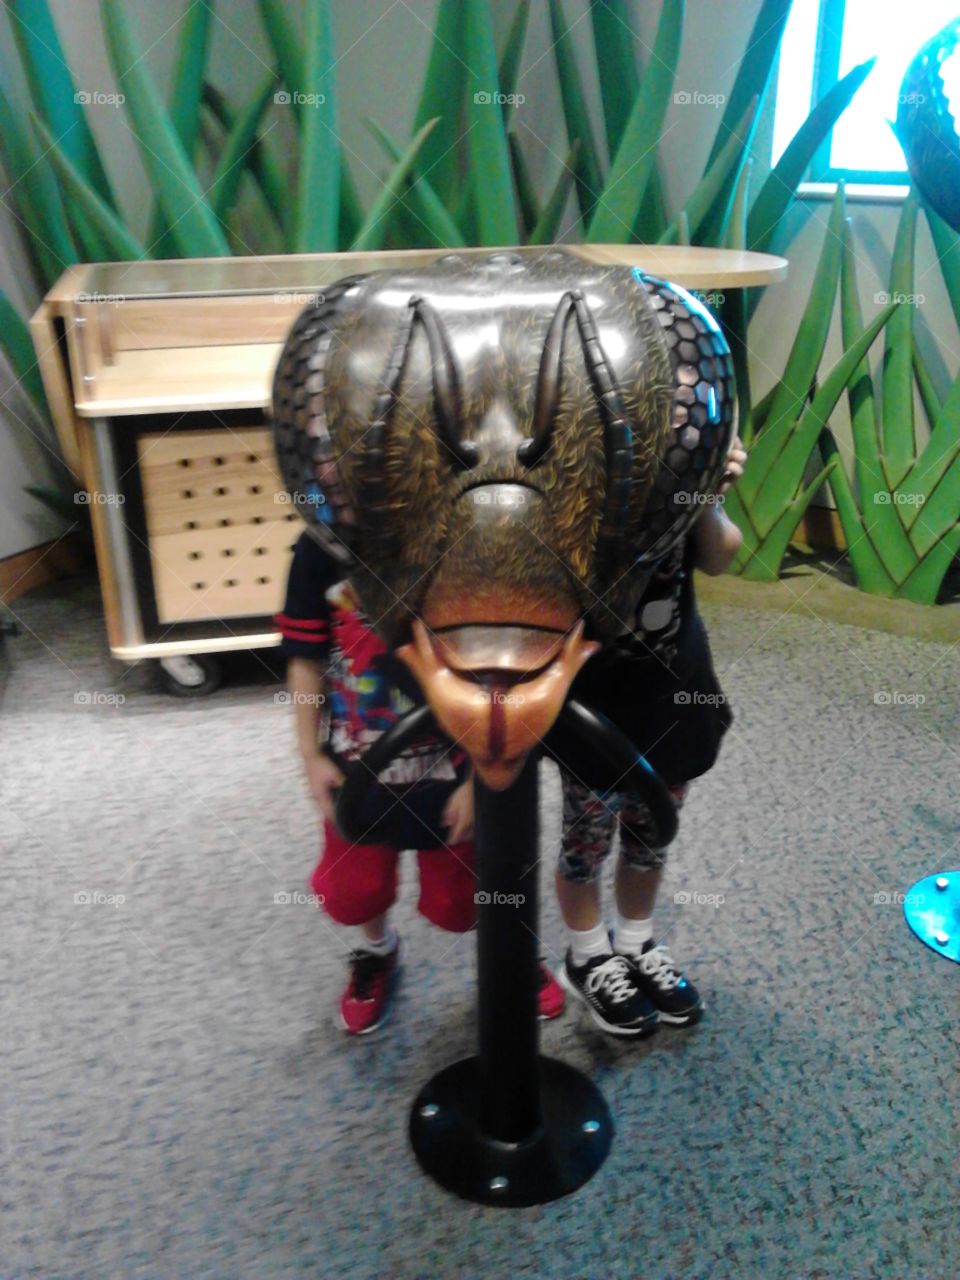 At the museum with the kids